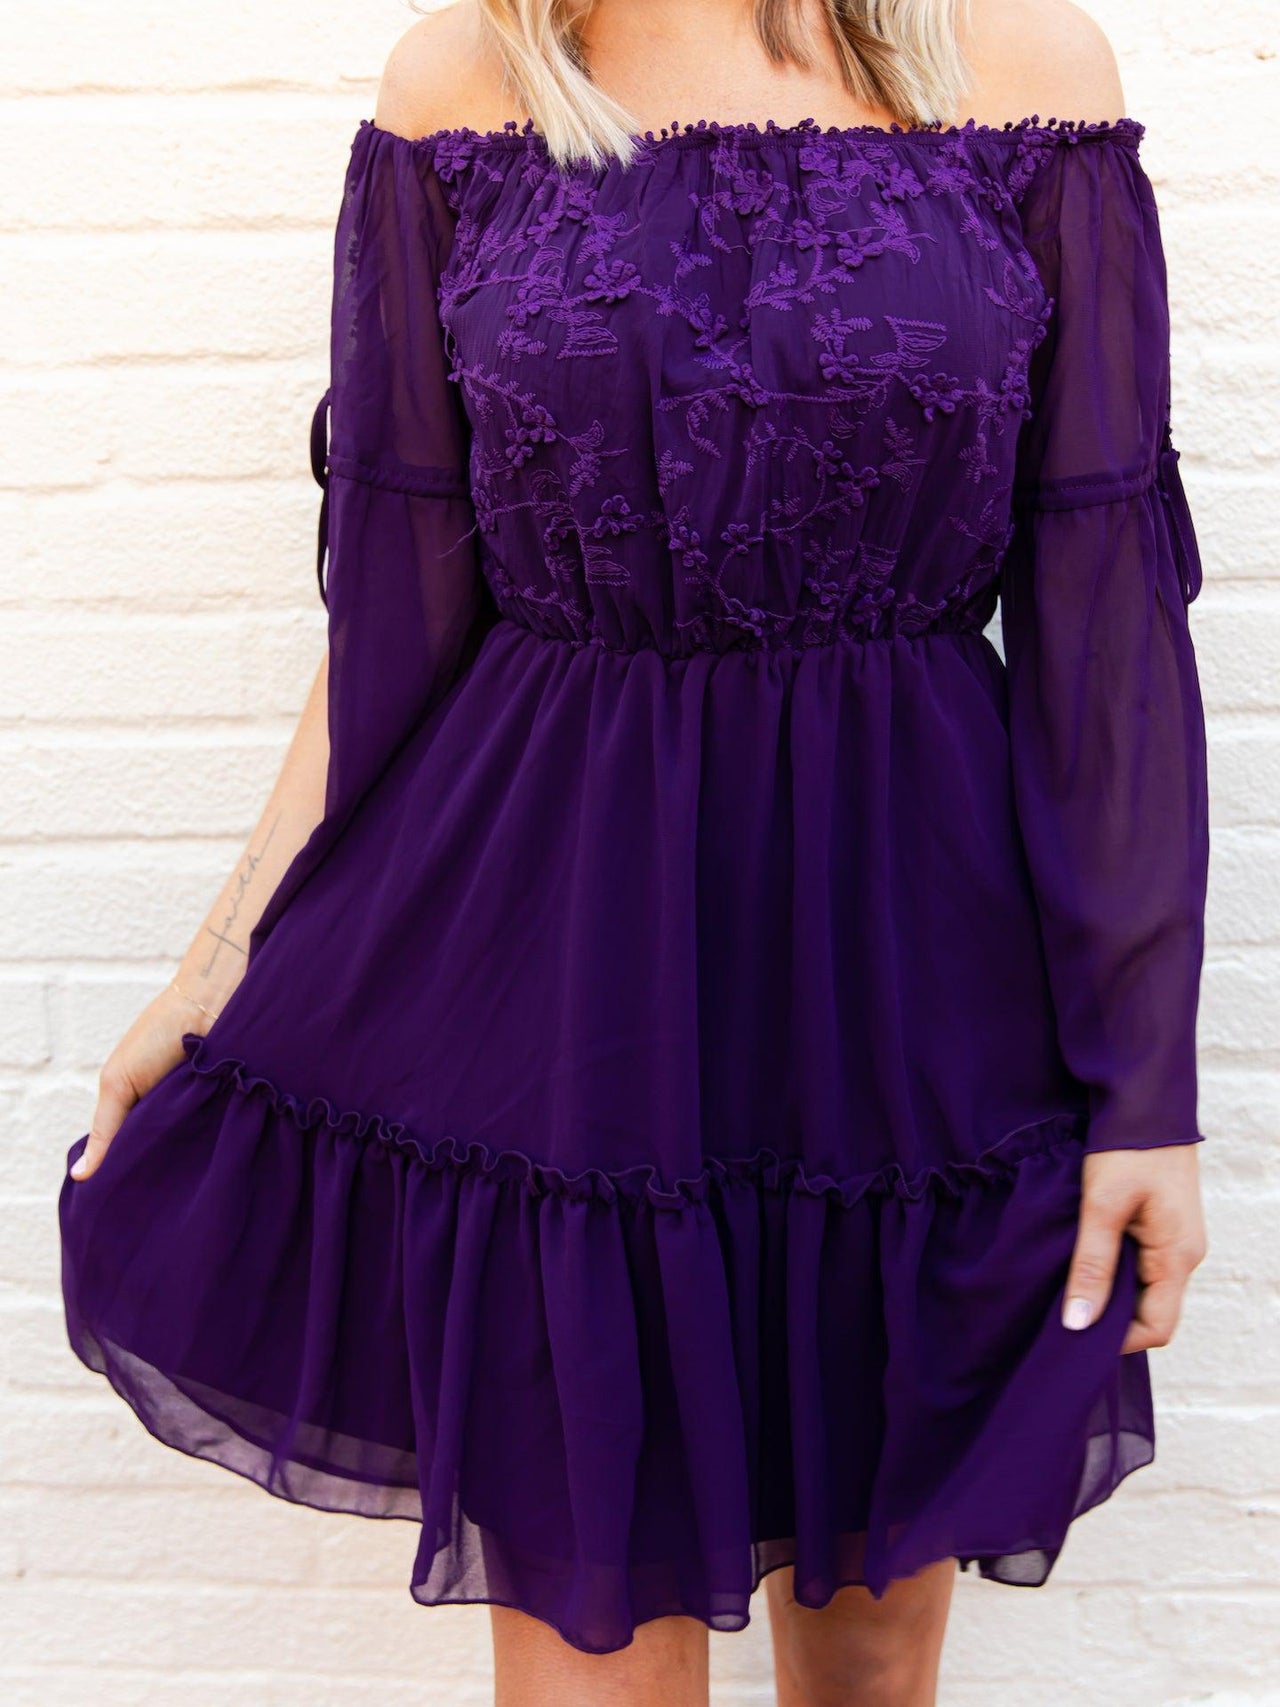 Cheerful Wishes Dress - Purple-Dresses-Southern Fried Chics